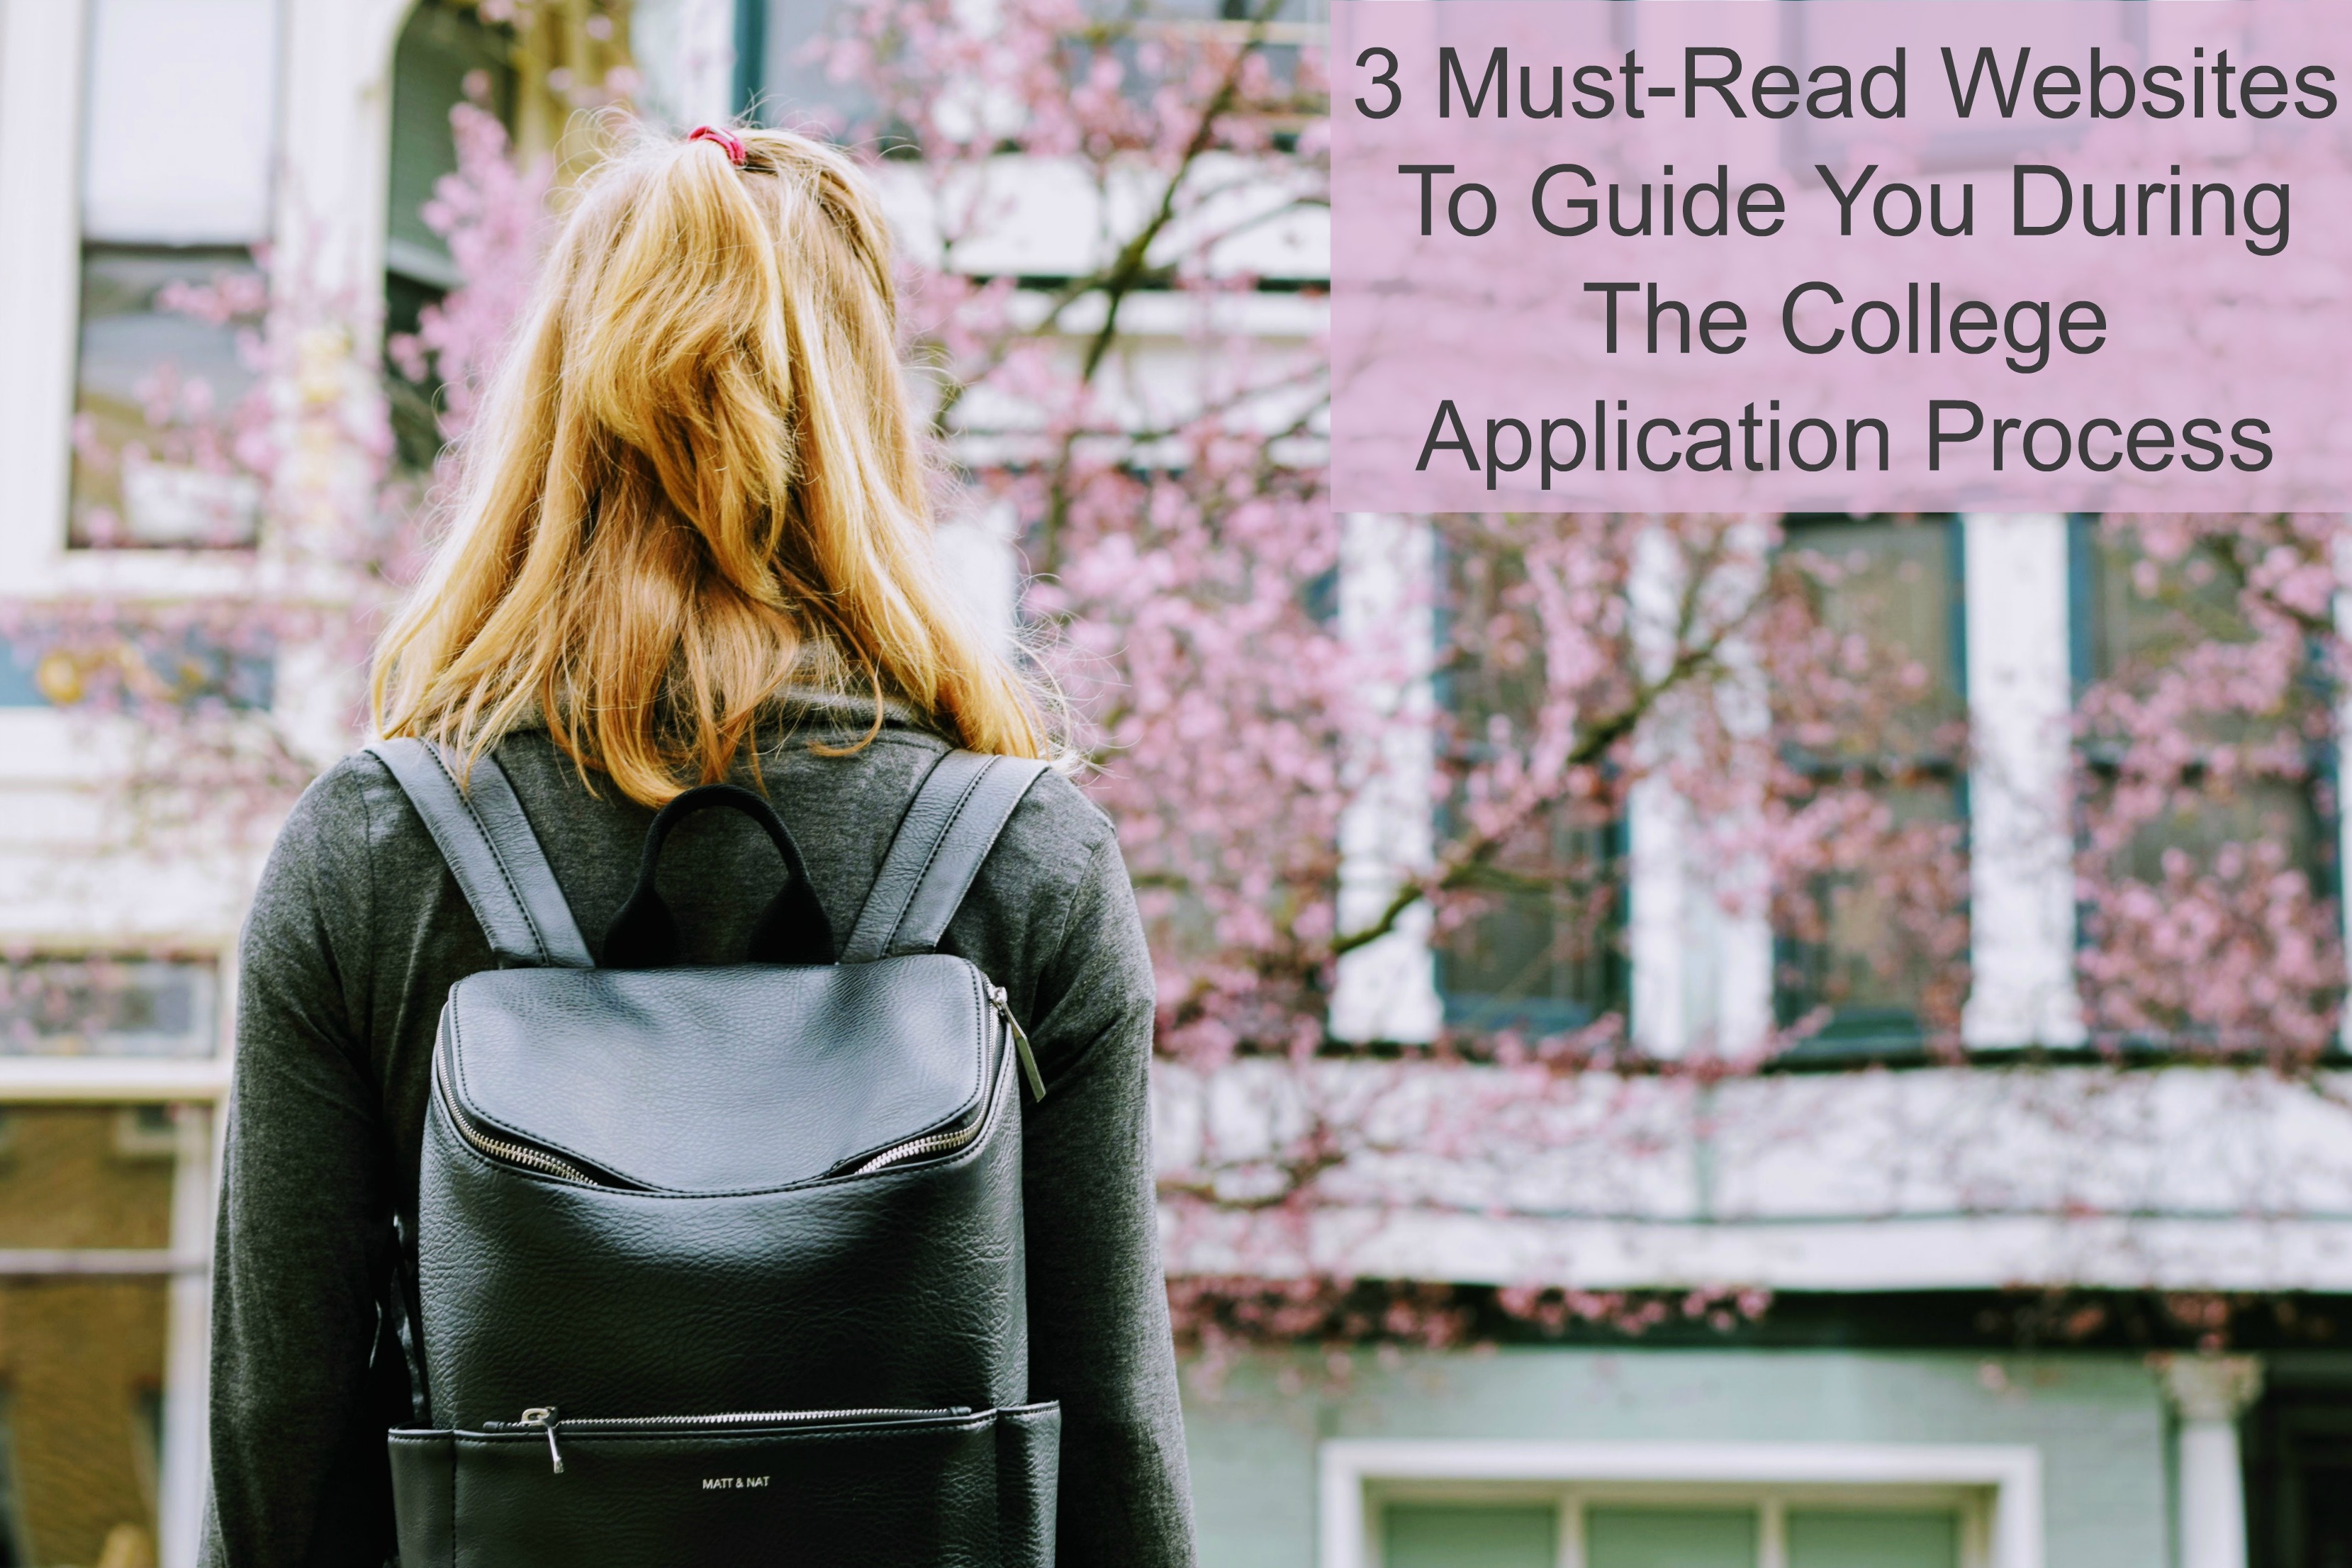 3 Must-Read Websites To Guide You During The College Application Process